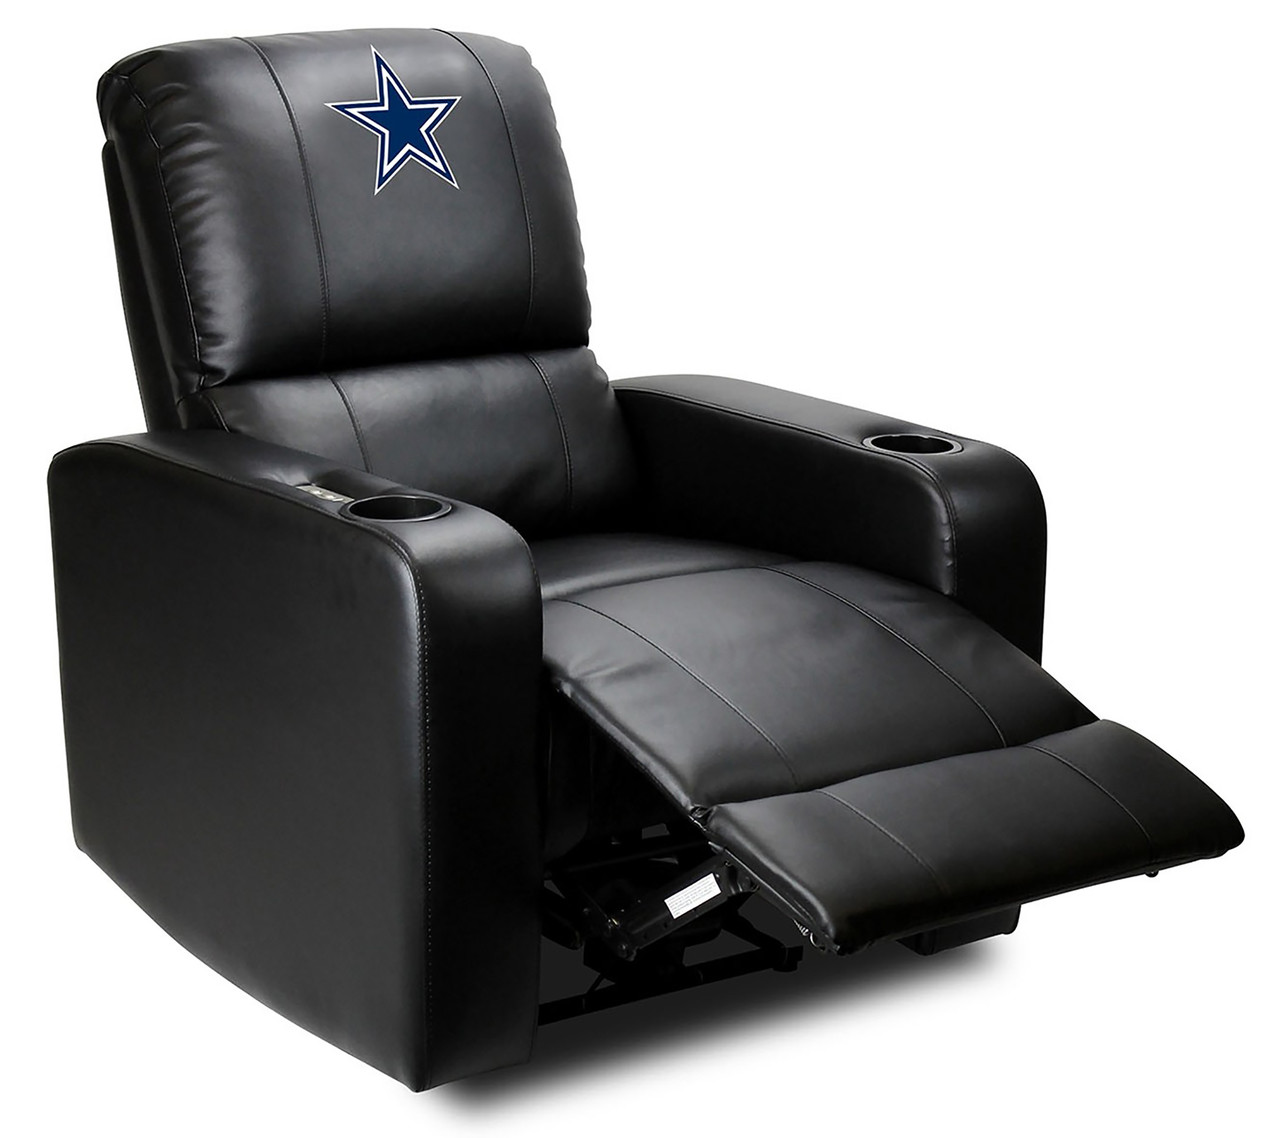 Dallas Cowboys Powered Theater Recliner With USB Port CB